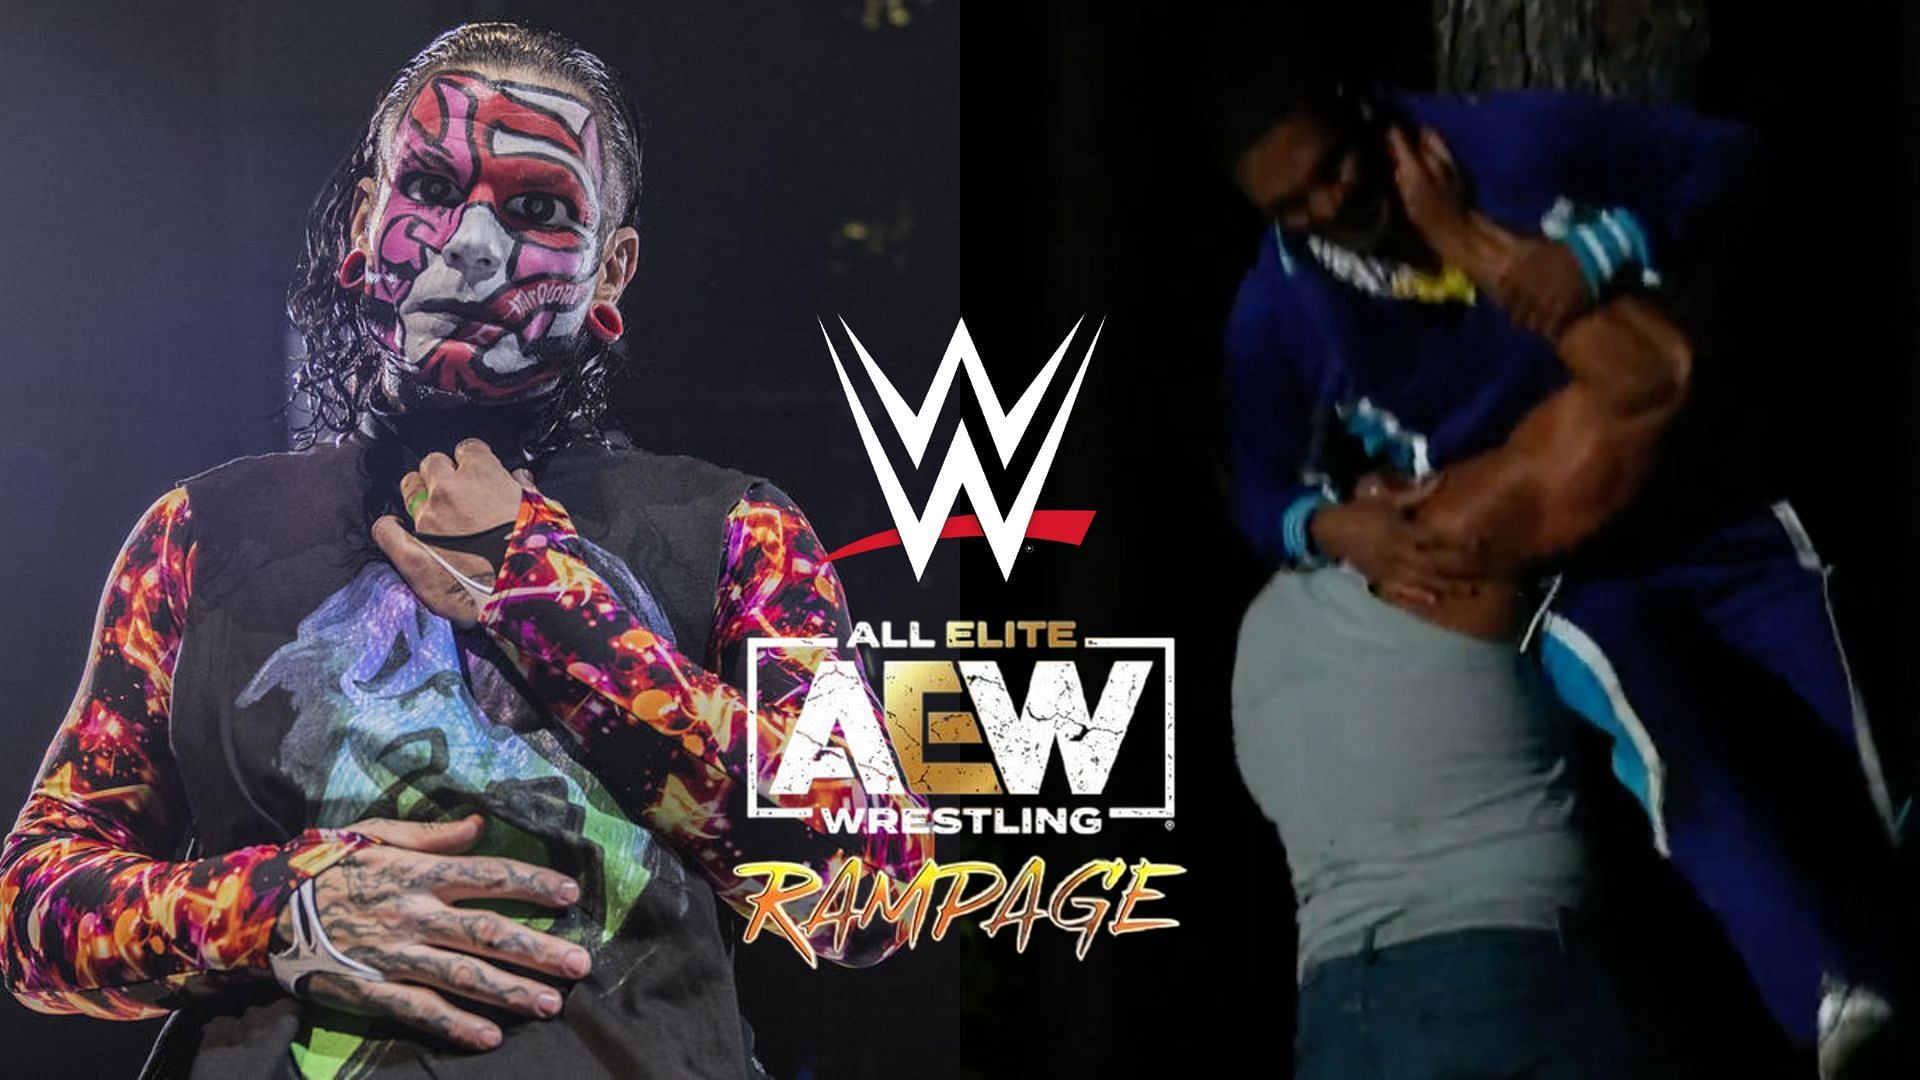 Another interesting edition of AEW Rampage